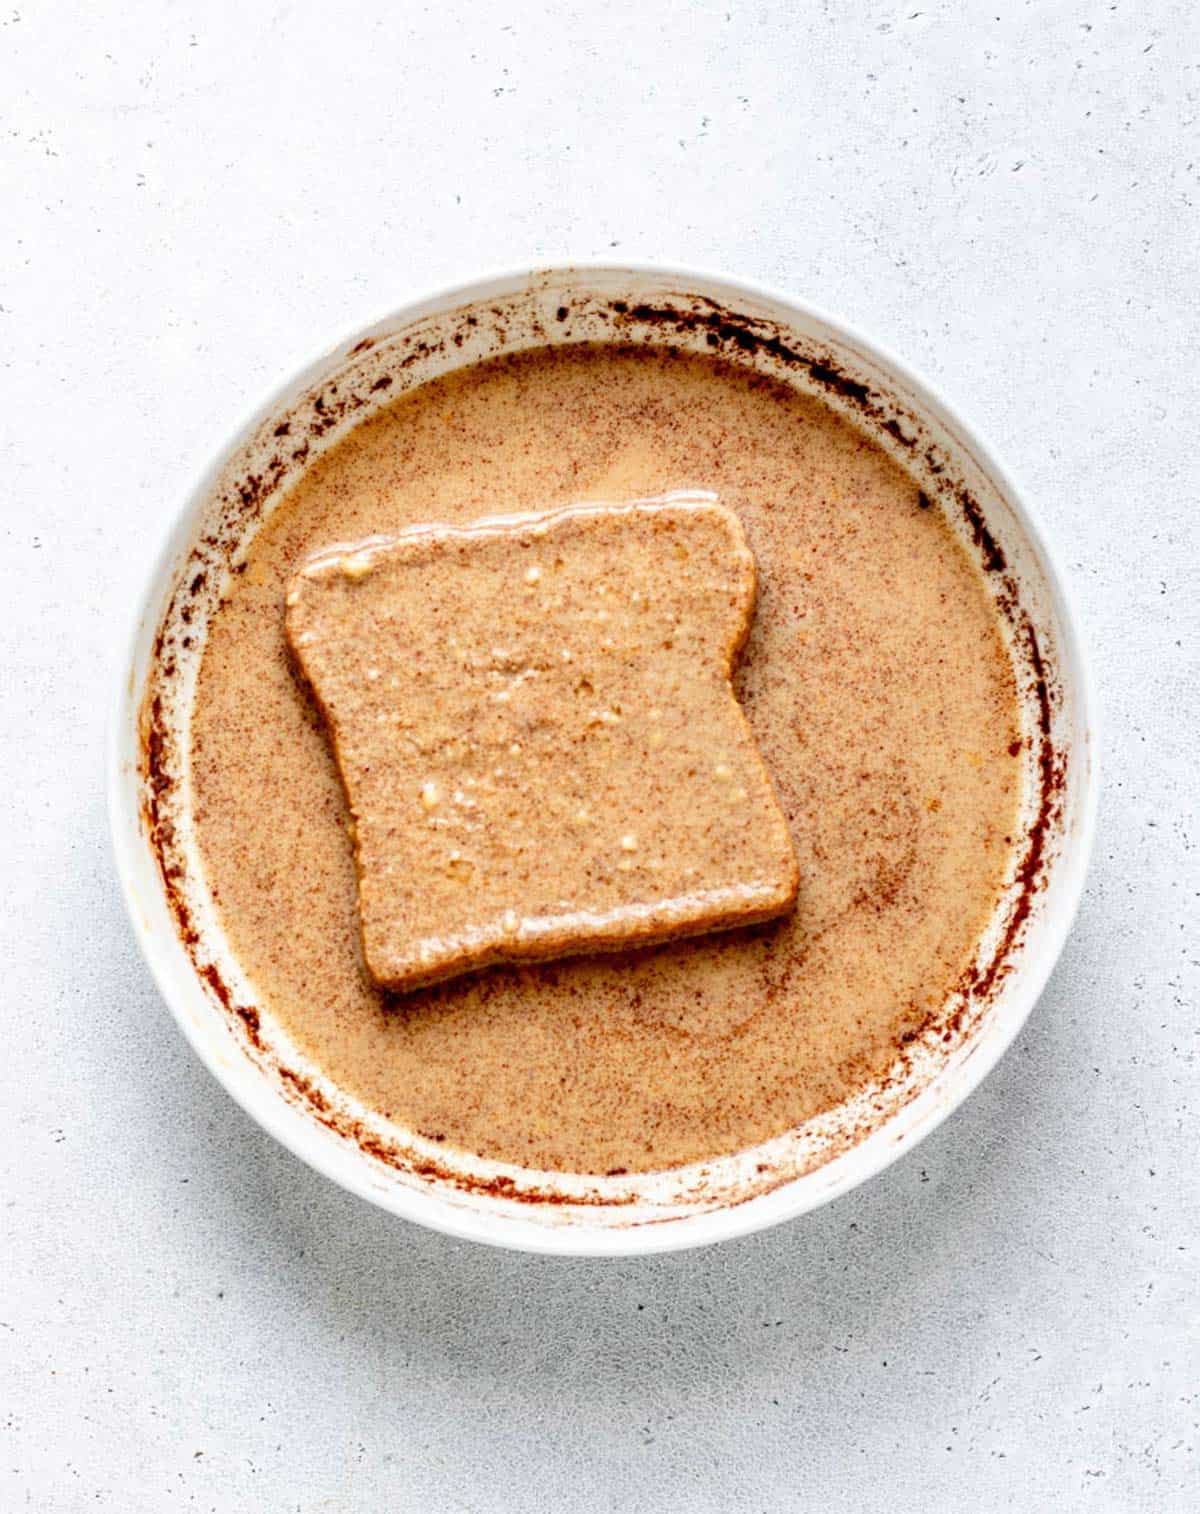 A piece of whole wheat Texas toast soaking in the healthy French toast batter.